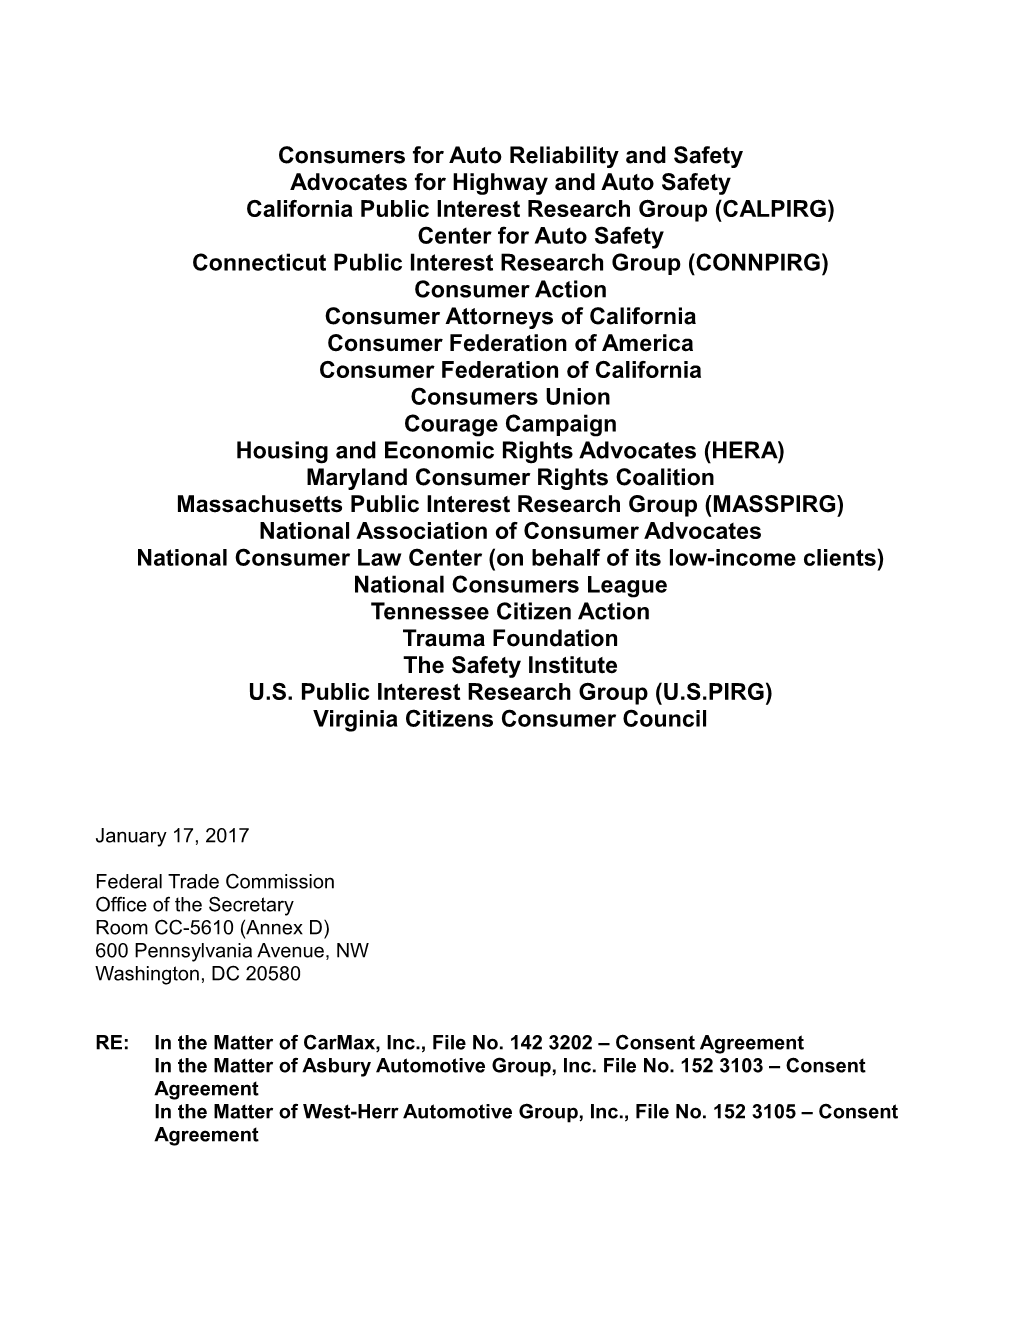 Consumers for Auto Reliability and Safety Advocates for Highway and Auto Safety California Public Interest Research Group (CALPI